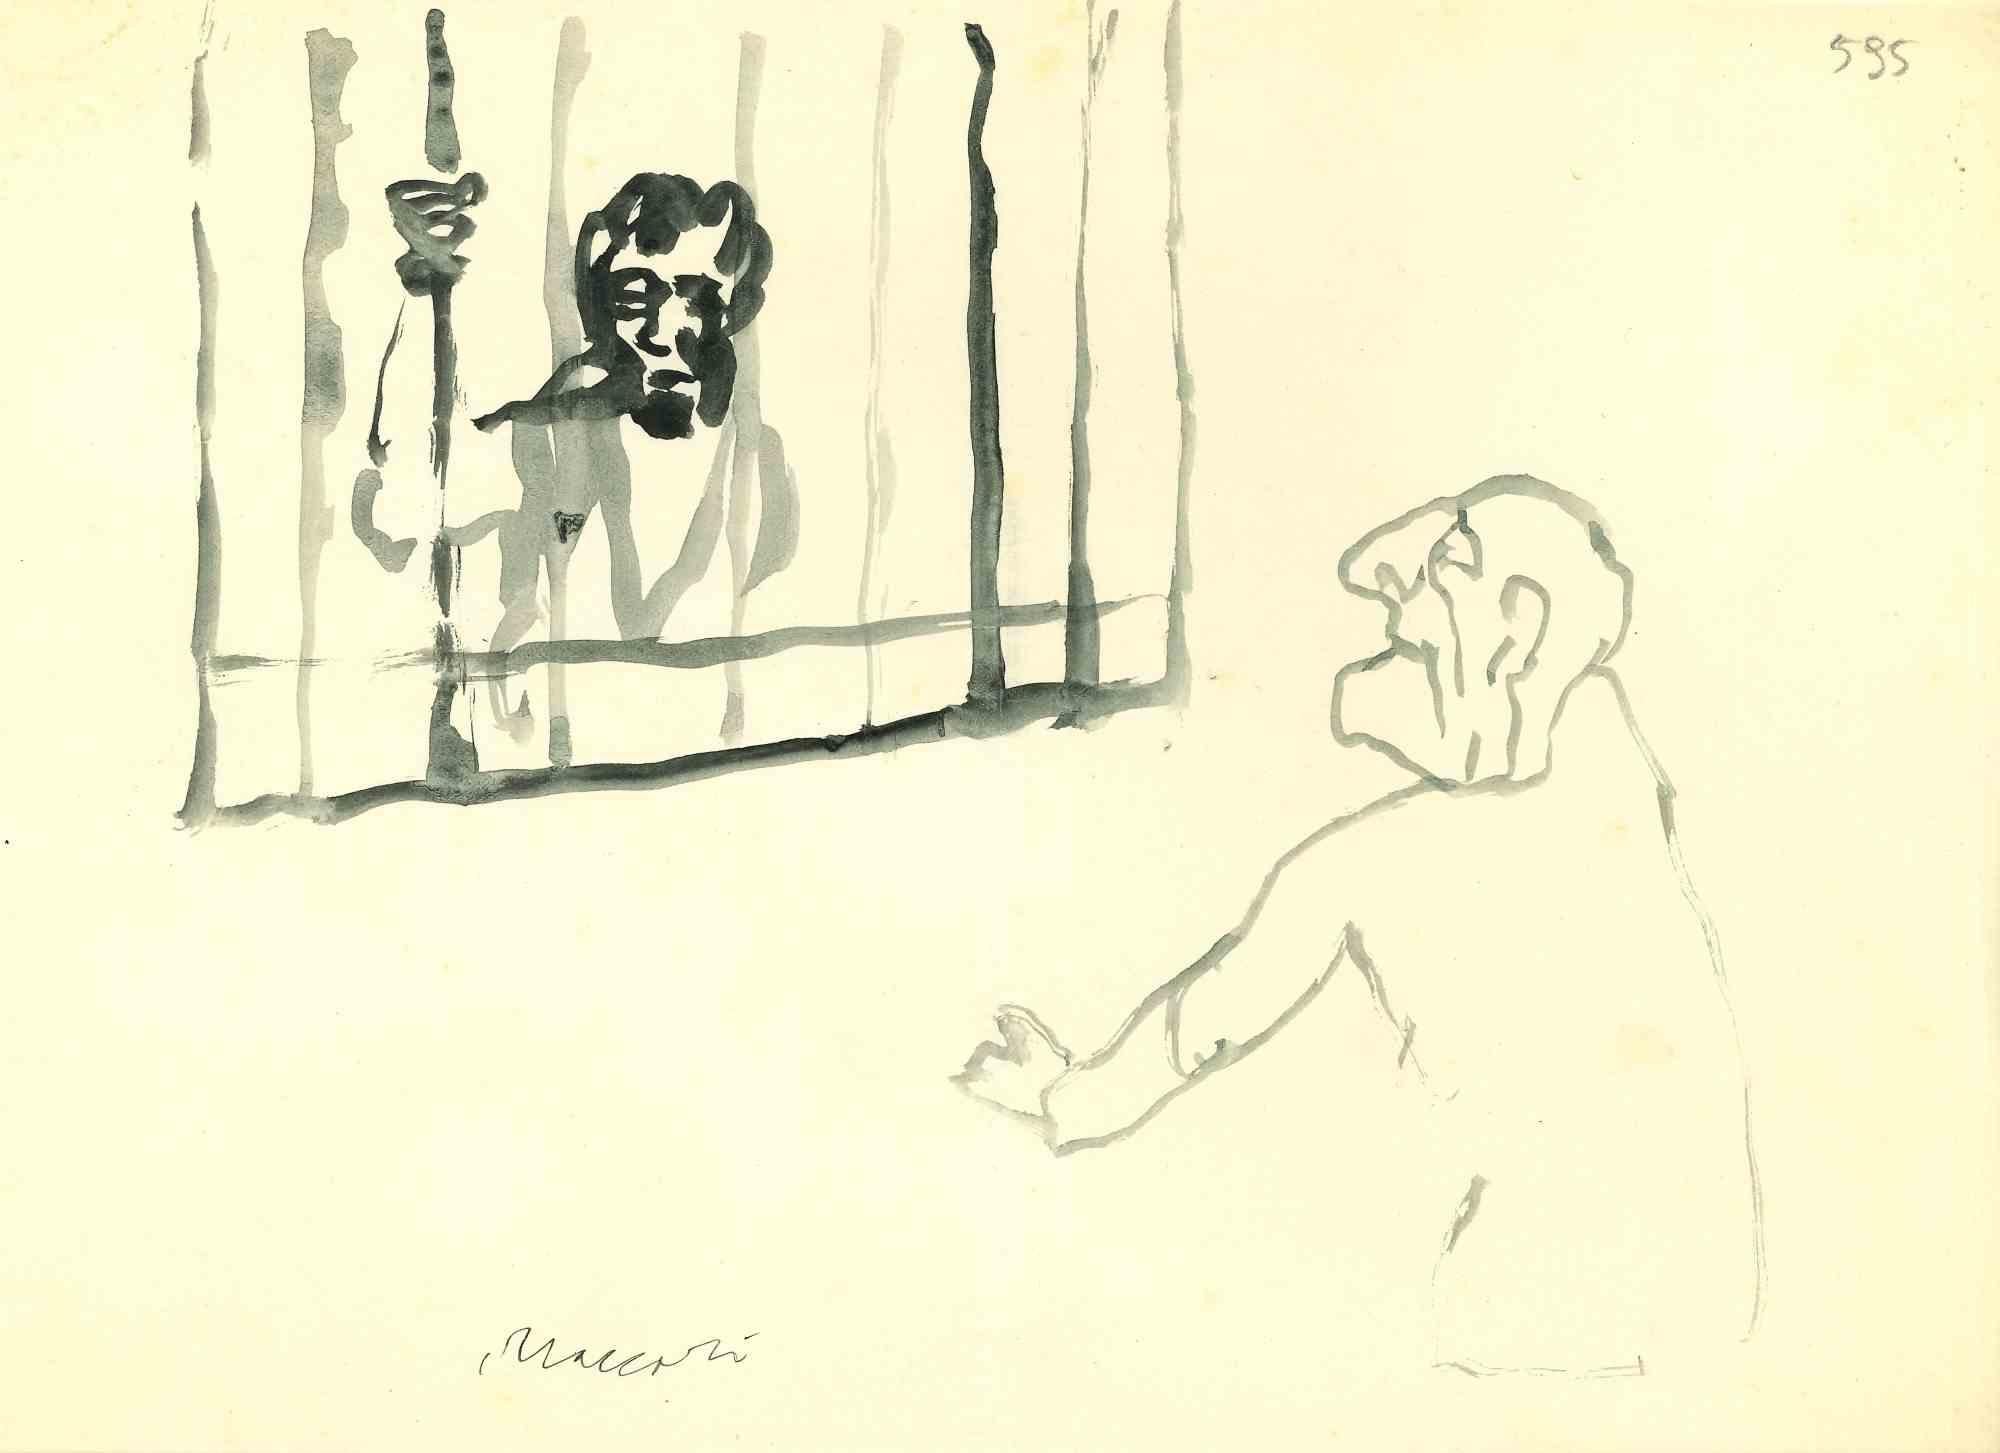 Conversation is a watercolor drawing realized by Mino Maccari  (1924-1989) in the Mid-20th Century.

Hand-signed.

Good conditions with slight foxing.

Mino Maccari (Siena, 1924-Rome, June 16, 1989) was an Italian writer, painter, engraver and